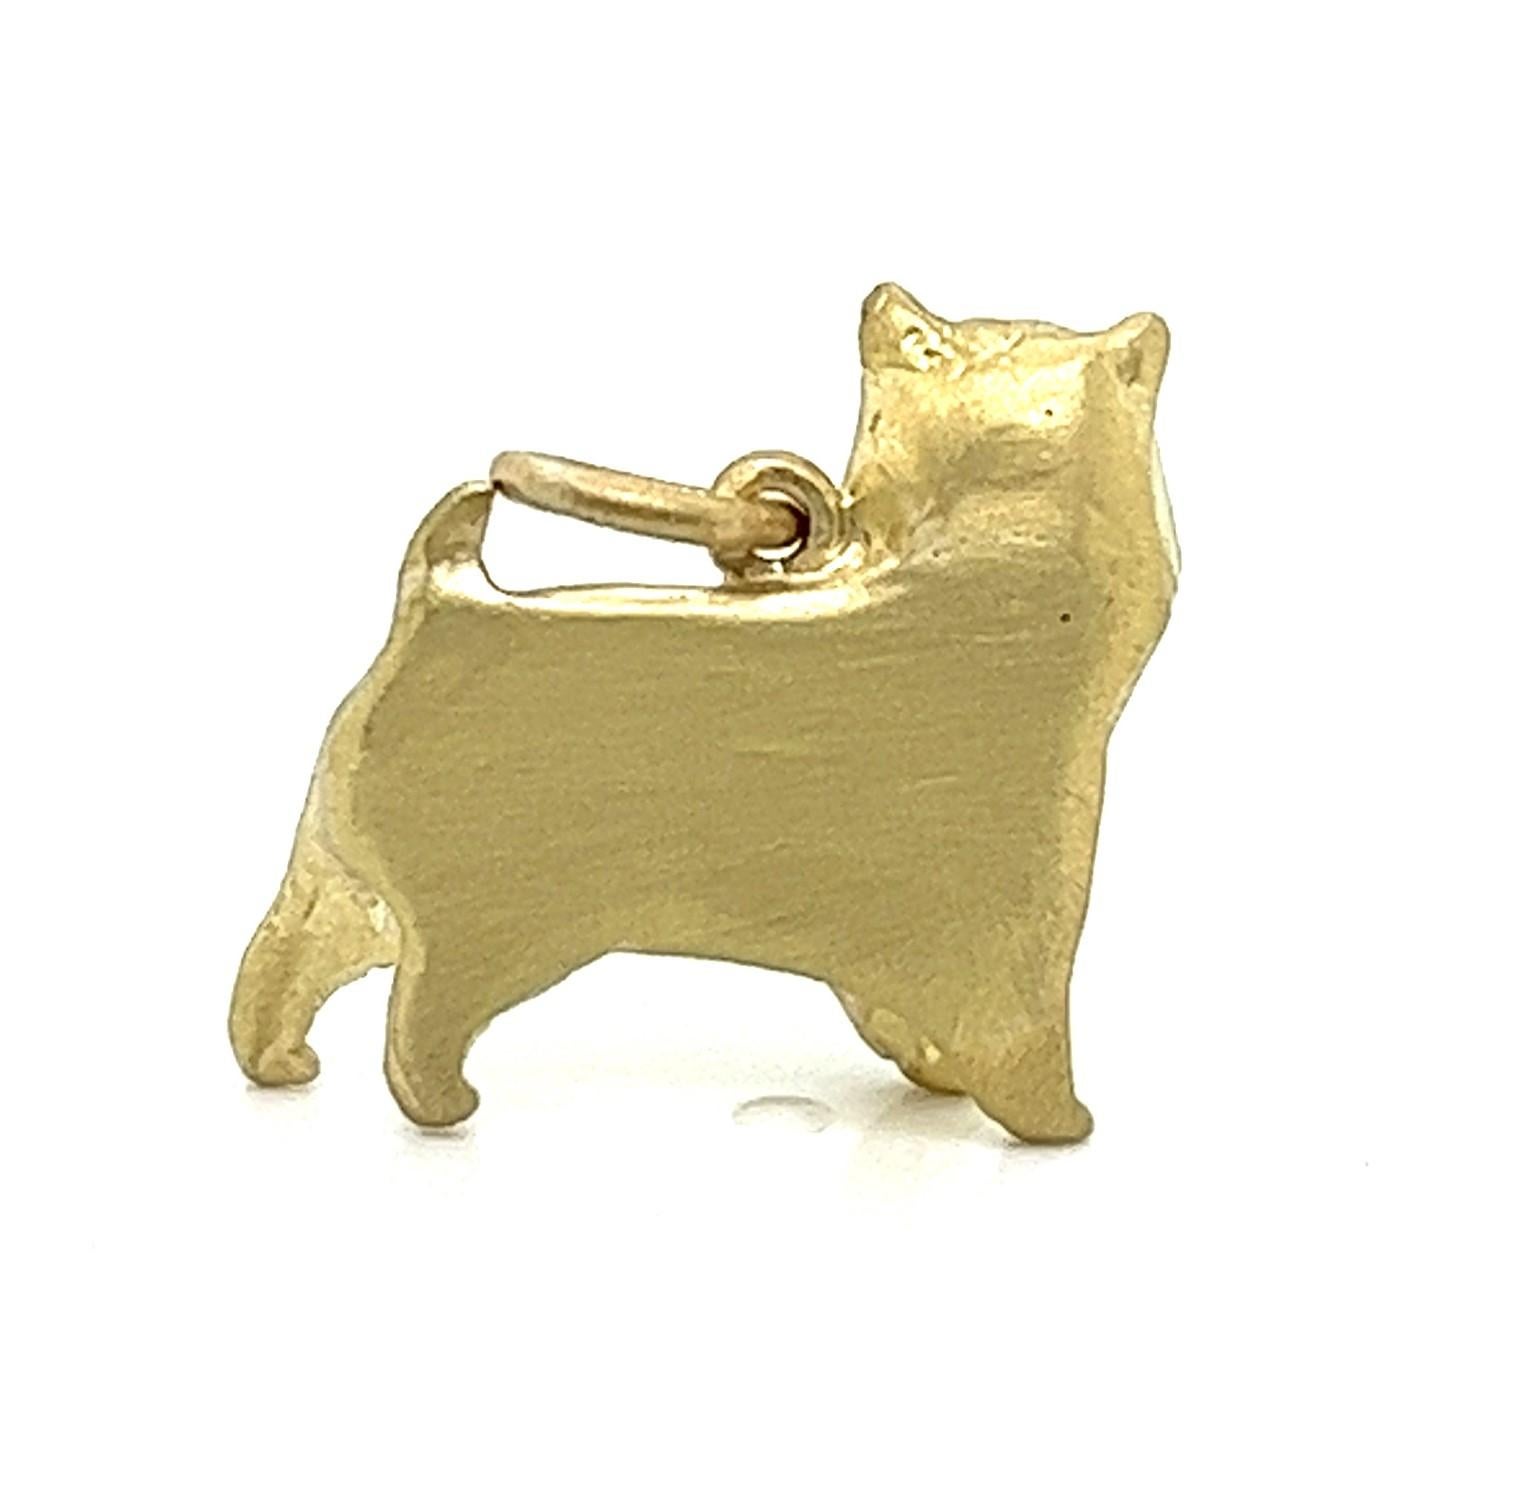 As good as gold: For the Norwich Terrier lover (or any dog lover), this sweet little 18 Karat Gold dog will melt your heart. Wear it alone or layered with other charms and necklaces. 

Diamonds = .02 cts.
Height and Width: 17 x 15mm
Signature